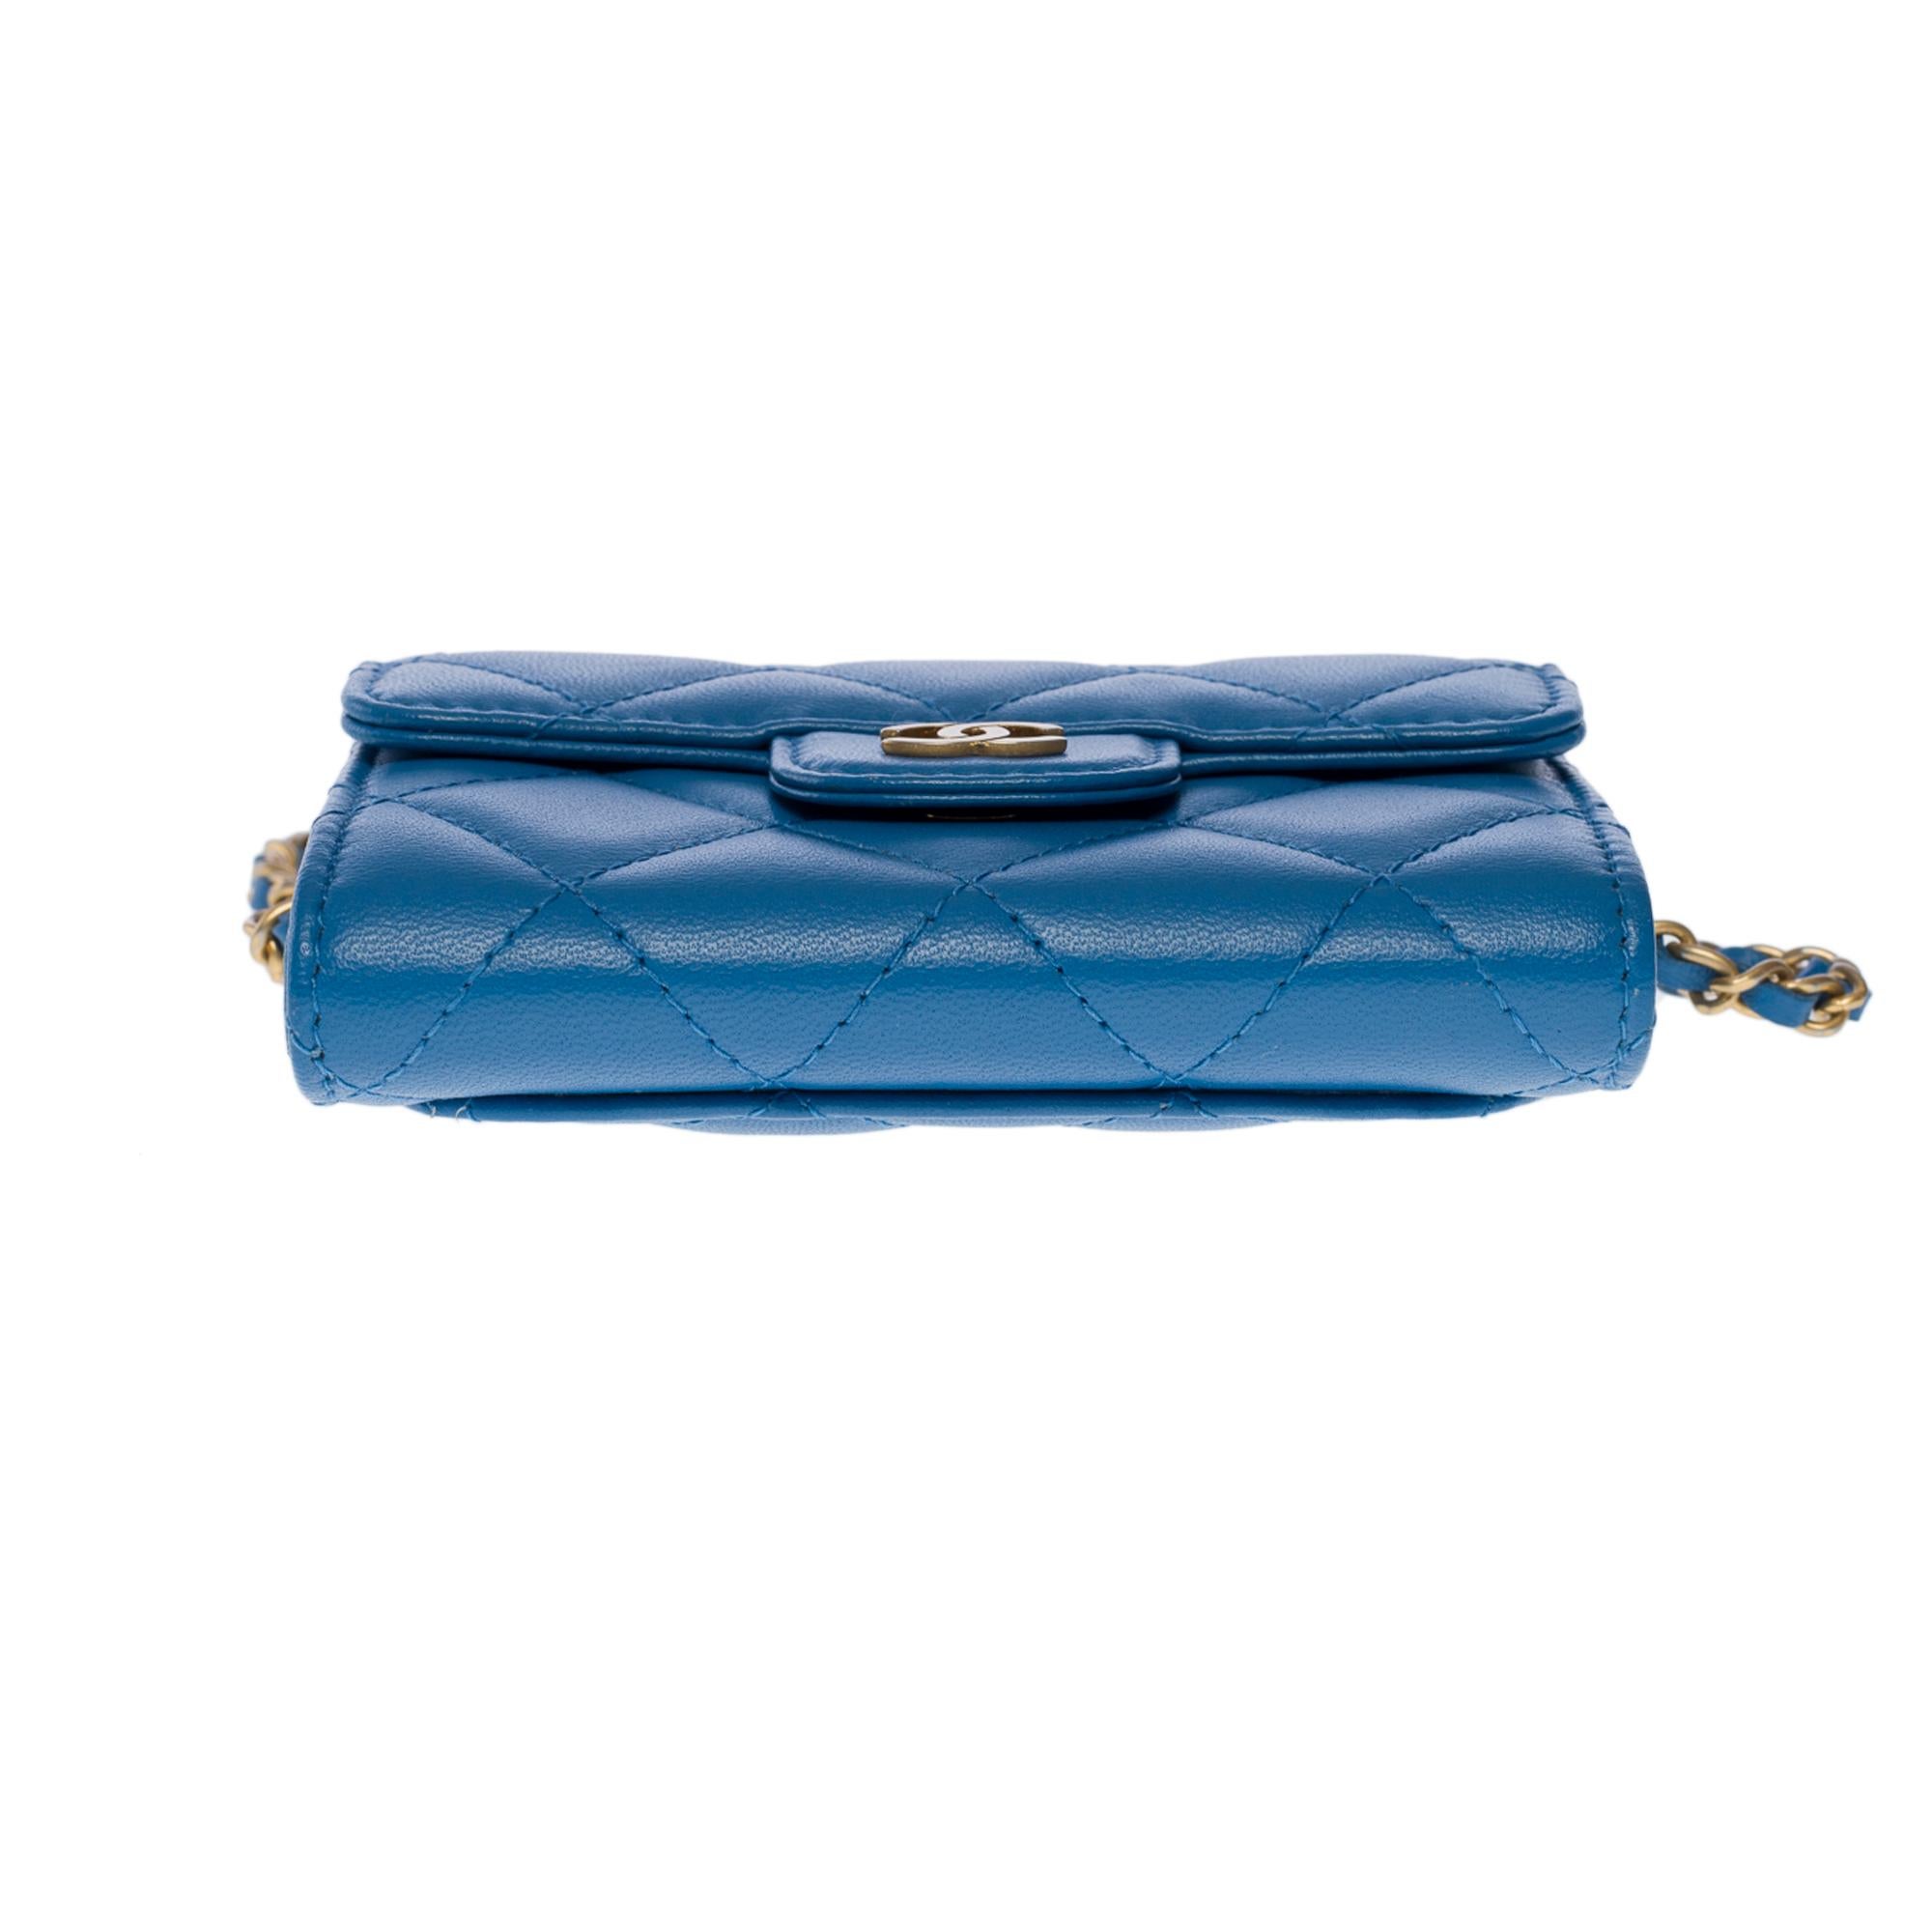 New Chanel Mini Wallet on Chain (WOC)  shoulder bag in blue quilted leather, GHW 6